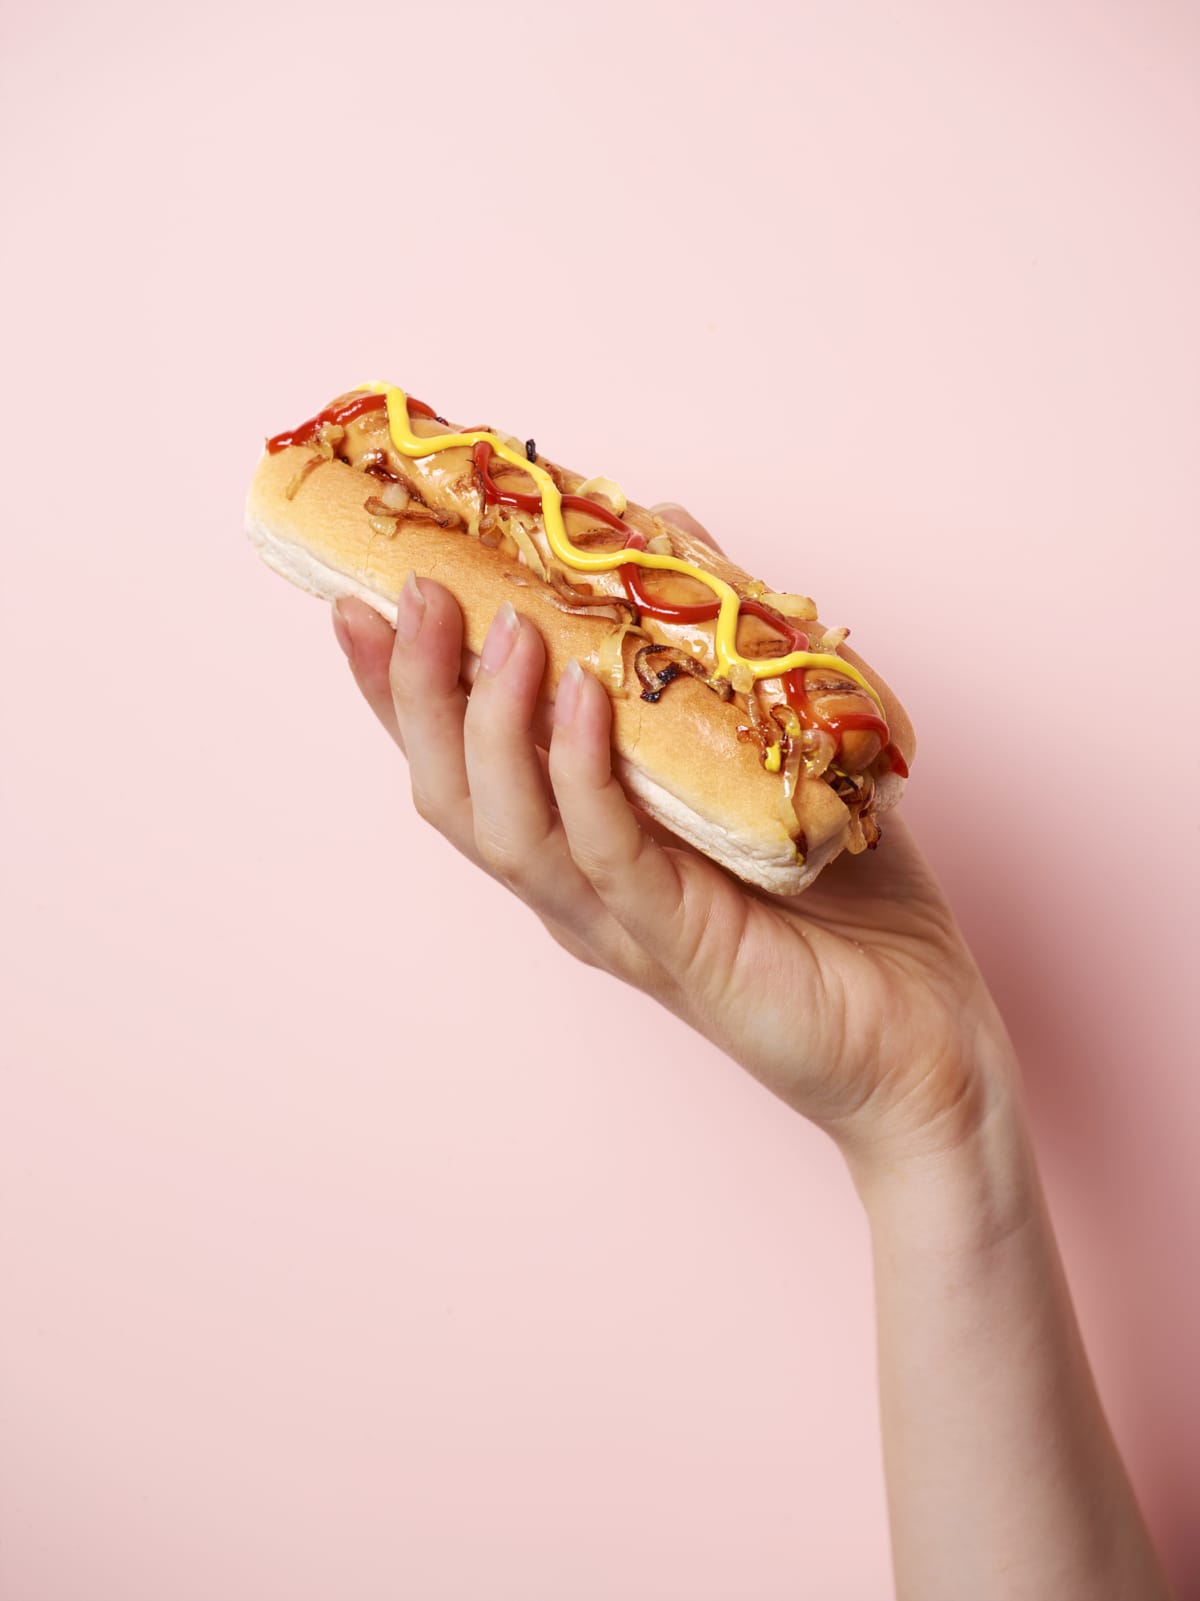 Young female hand holding American style hotdog on a pastel pink background